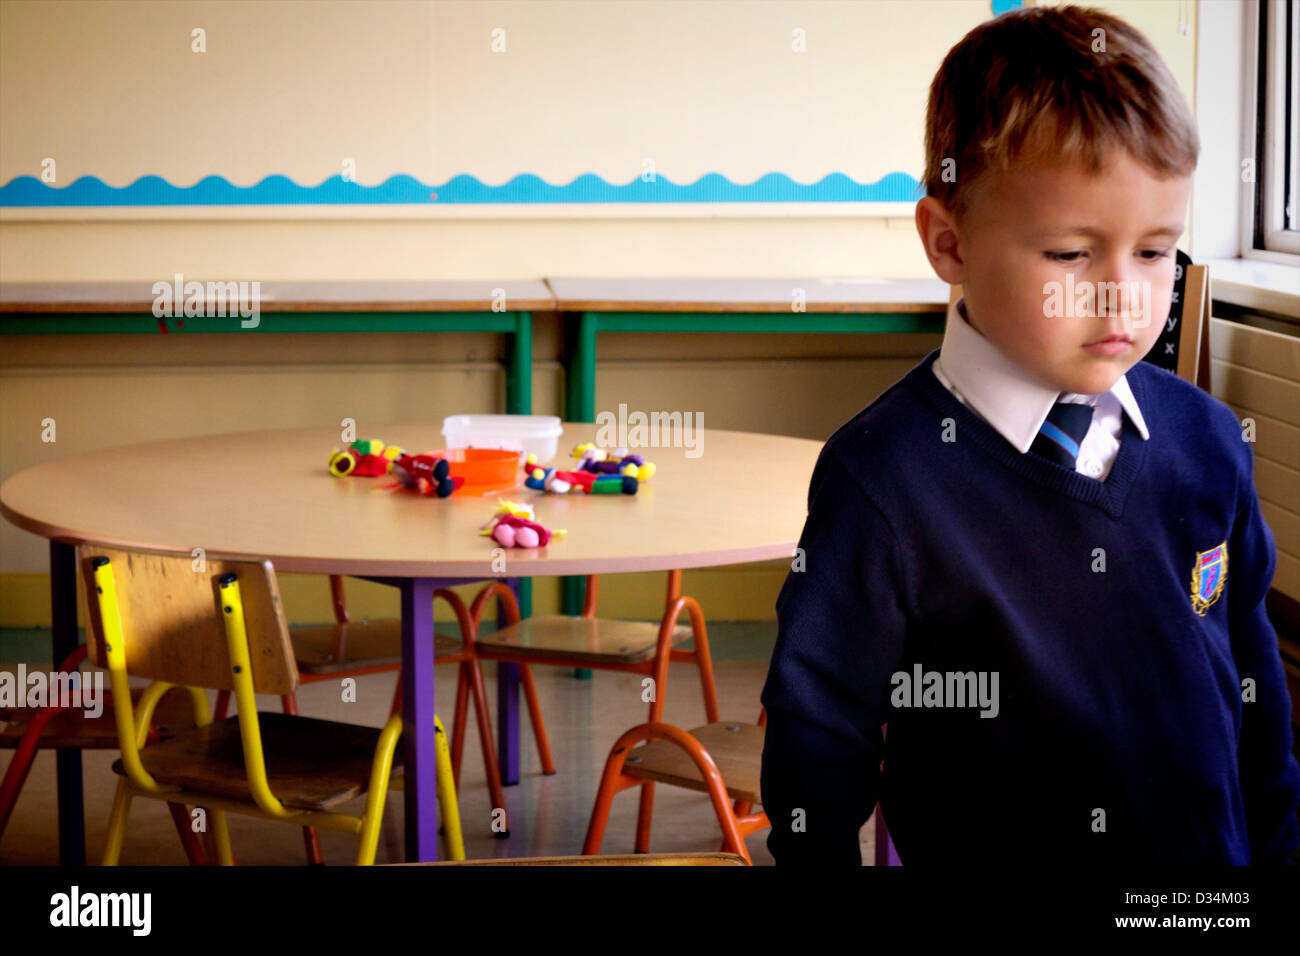 Small boy on his first day in school, alone in the classroom with group table and toys on it. Stock Photo